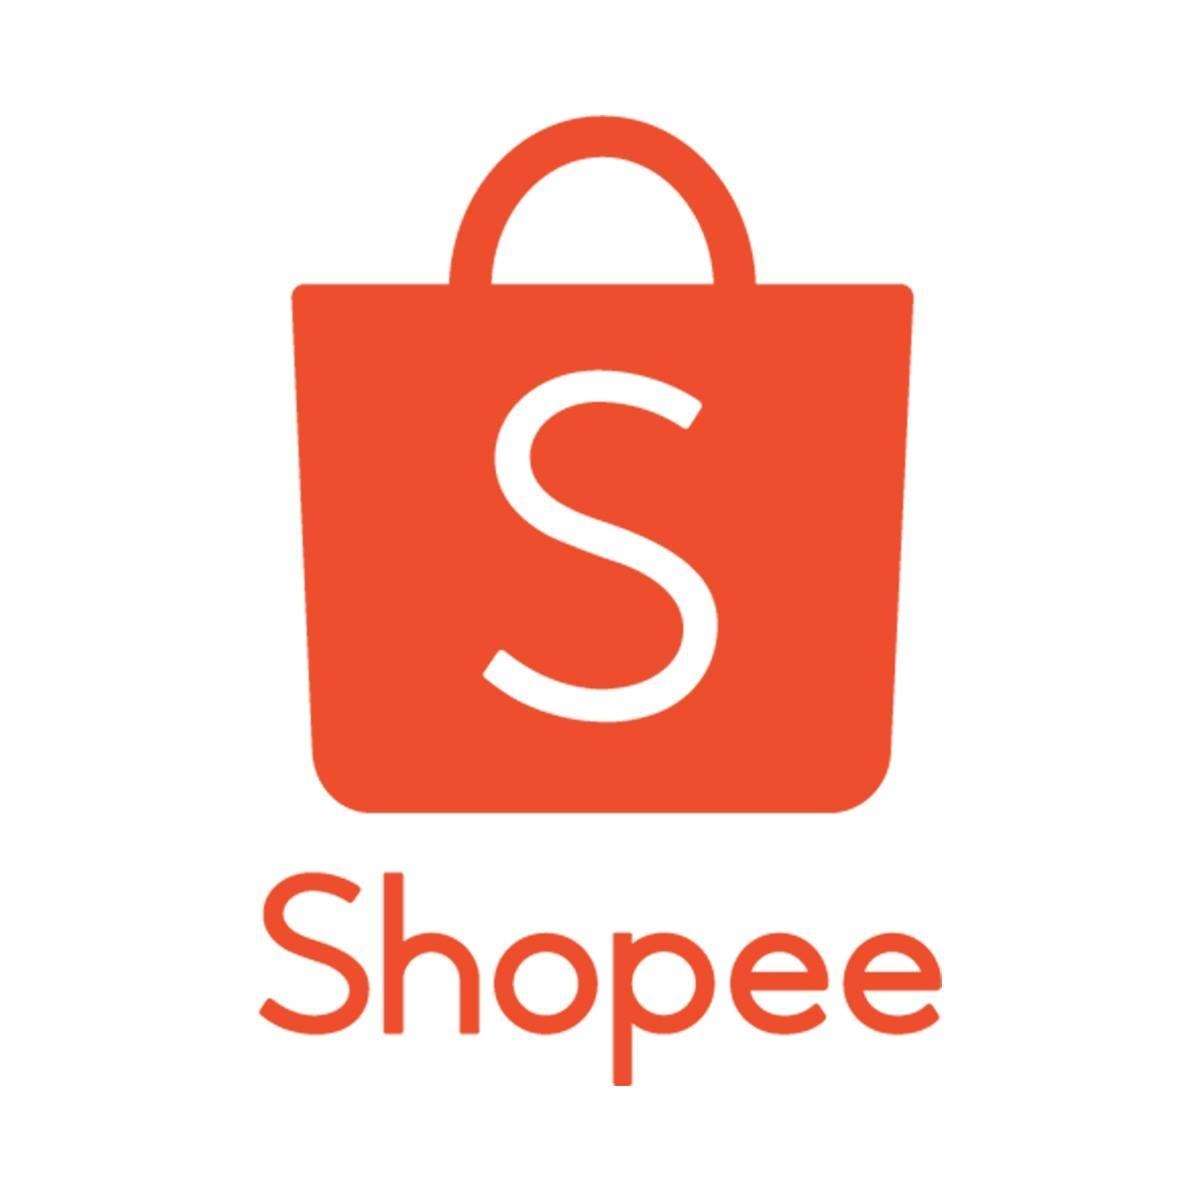 Can I Sell food on Shopee?